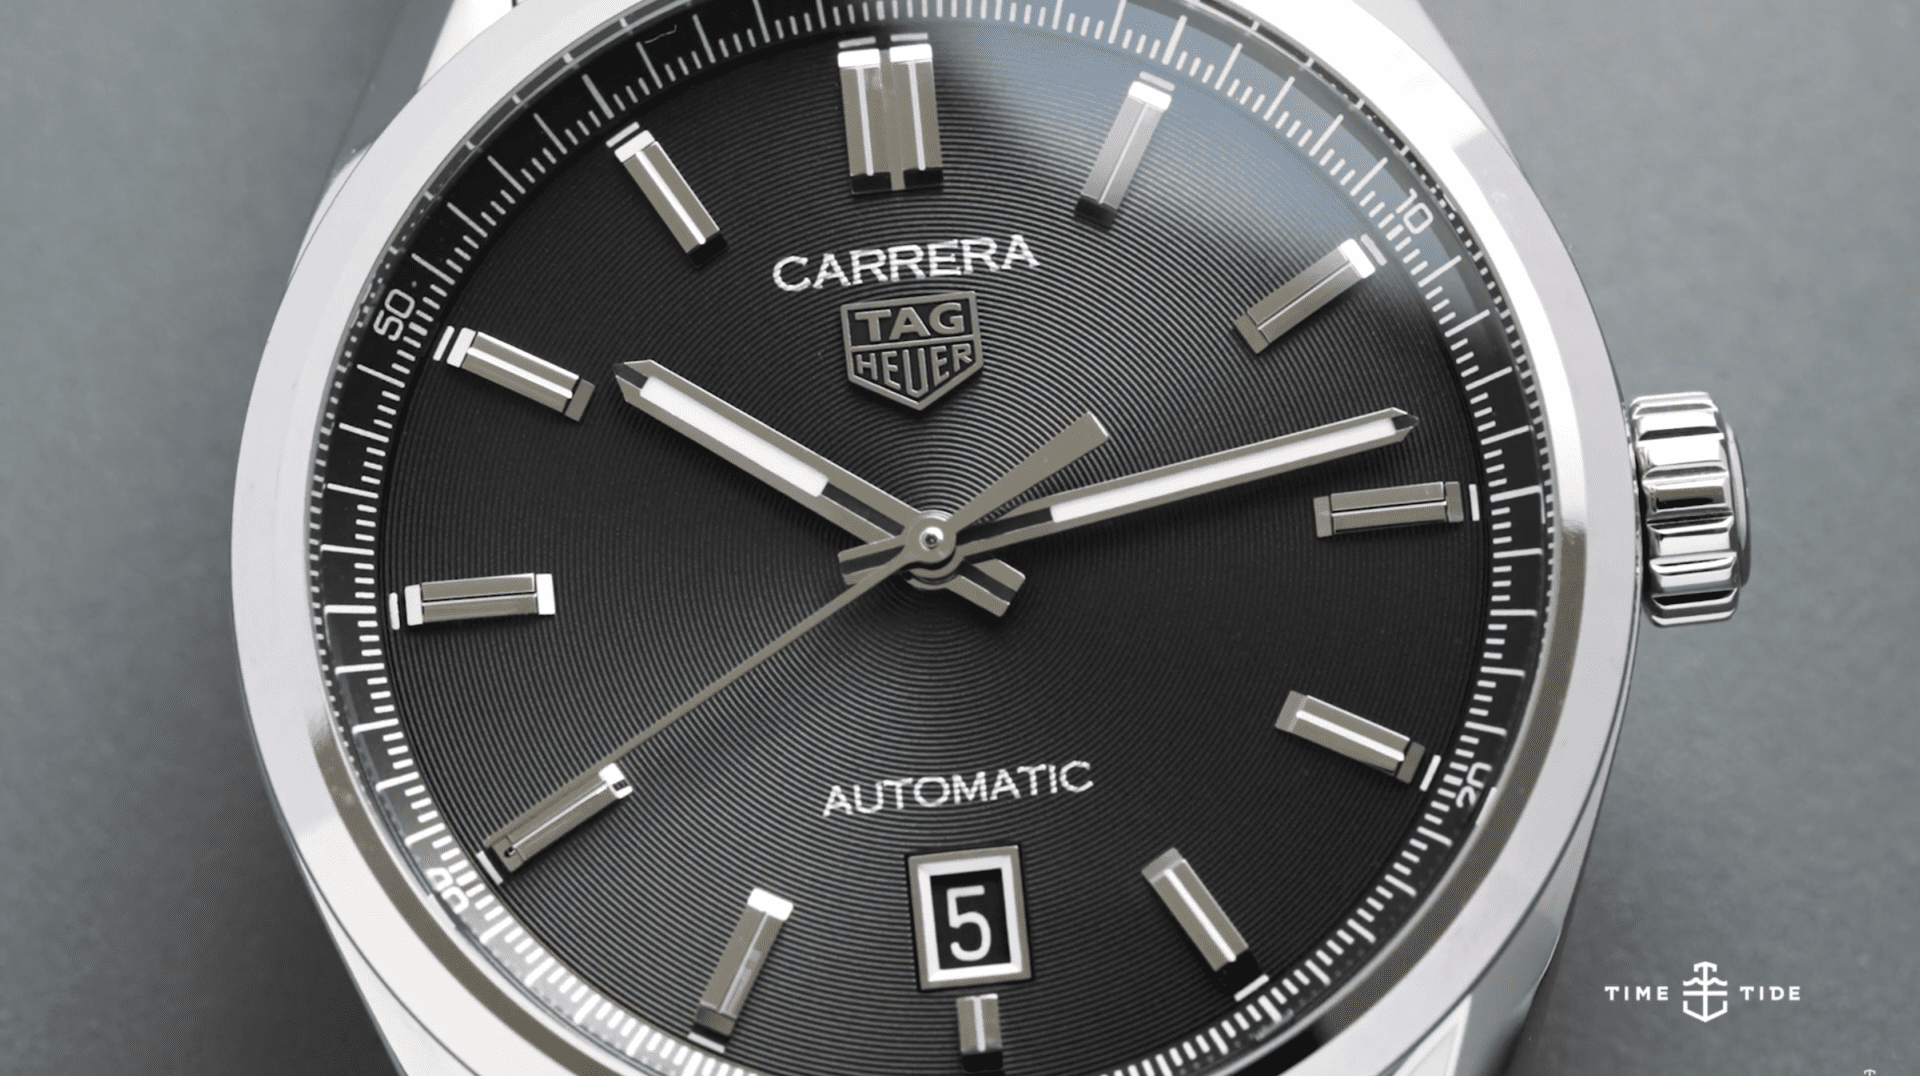 HANDS-ON: The TAG Heuer Carrera Three Hands Collection delivers accessible style in a range of sizes